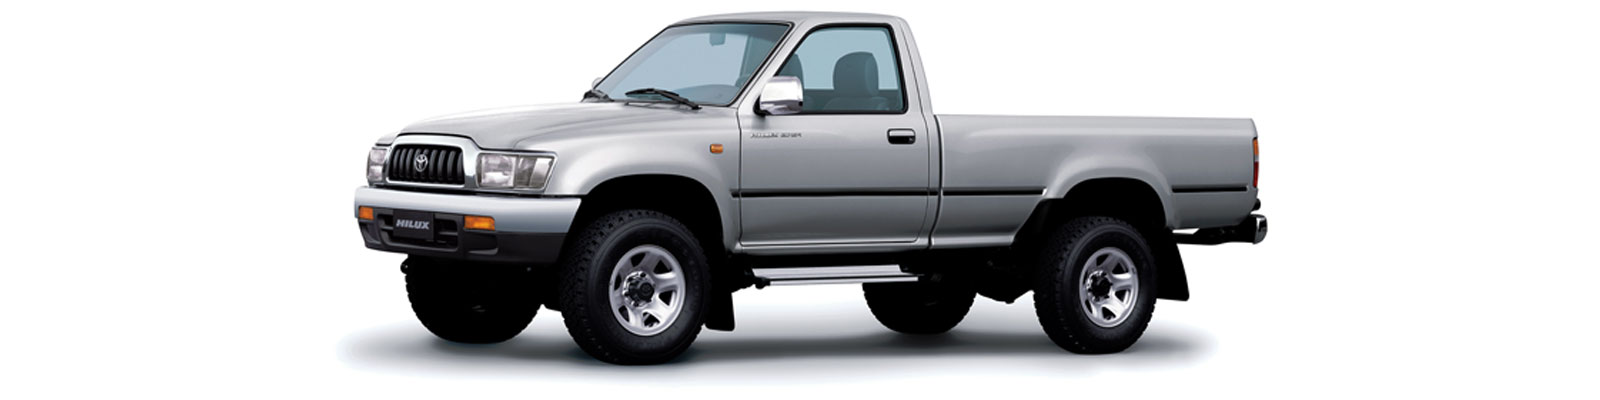 Accessories for Toyota Hilux Single Cab 2001-2005